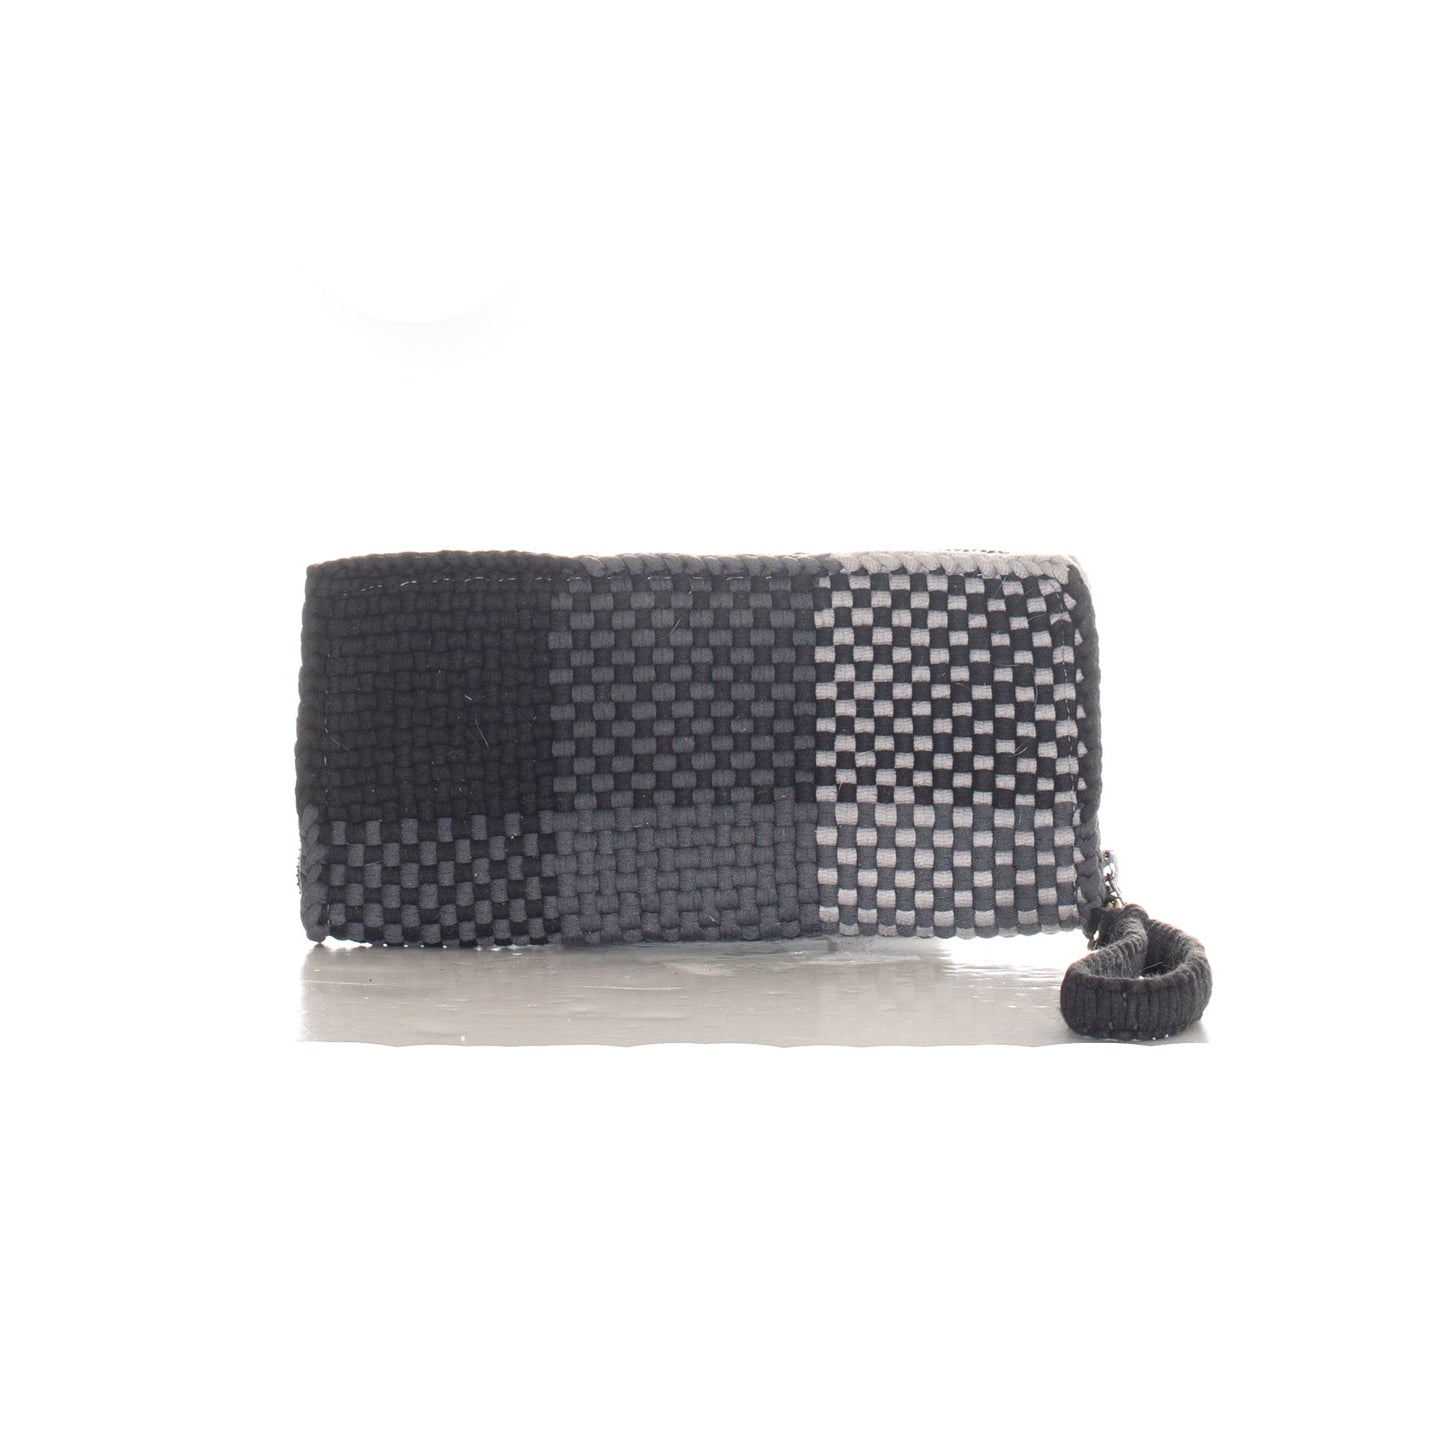 ARCHIVE SALE - NARRA ZIP WALLET - PHILIPPINES COLLECTION - TRI-TONE GREY - ITEM NO. 24040